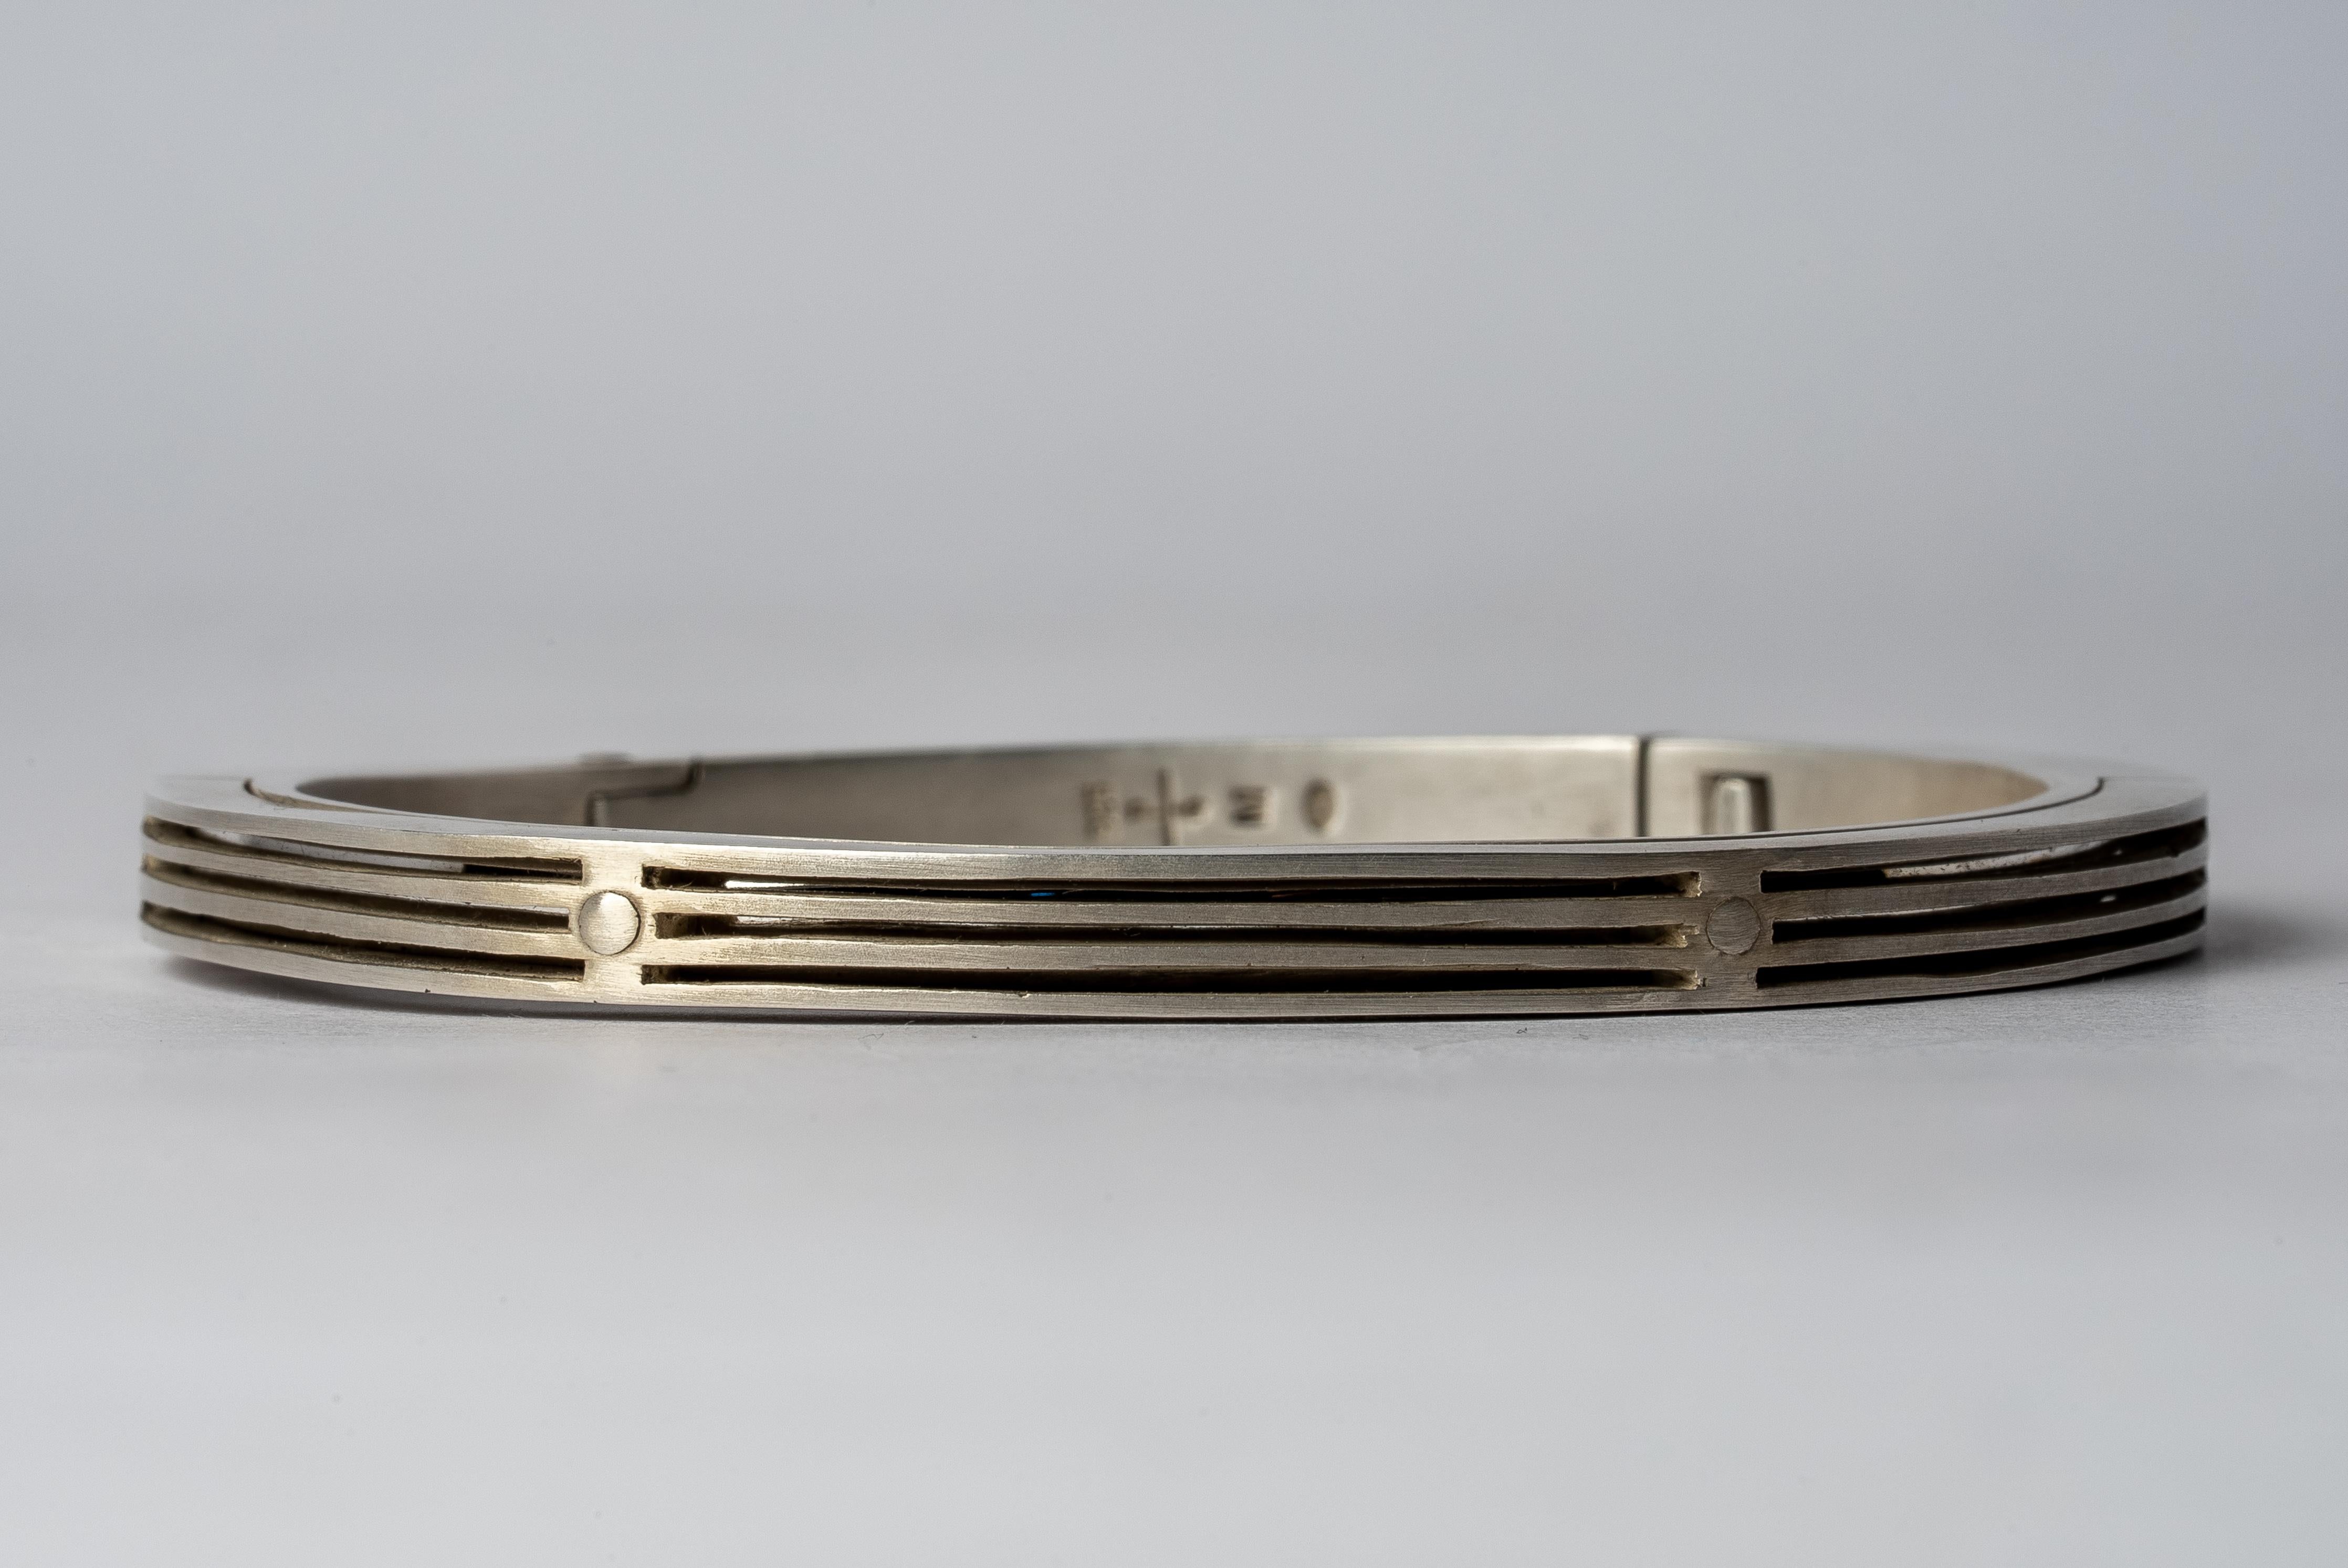 Sistema Bracelet v2 (Deco-Slits, Layered, 5mm, DA+PA) In New Condition For Sale In Hong Kong, Hong Kong Island